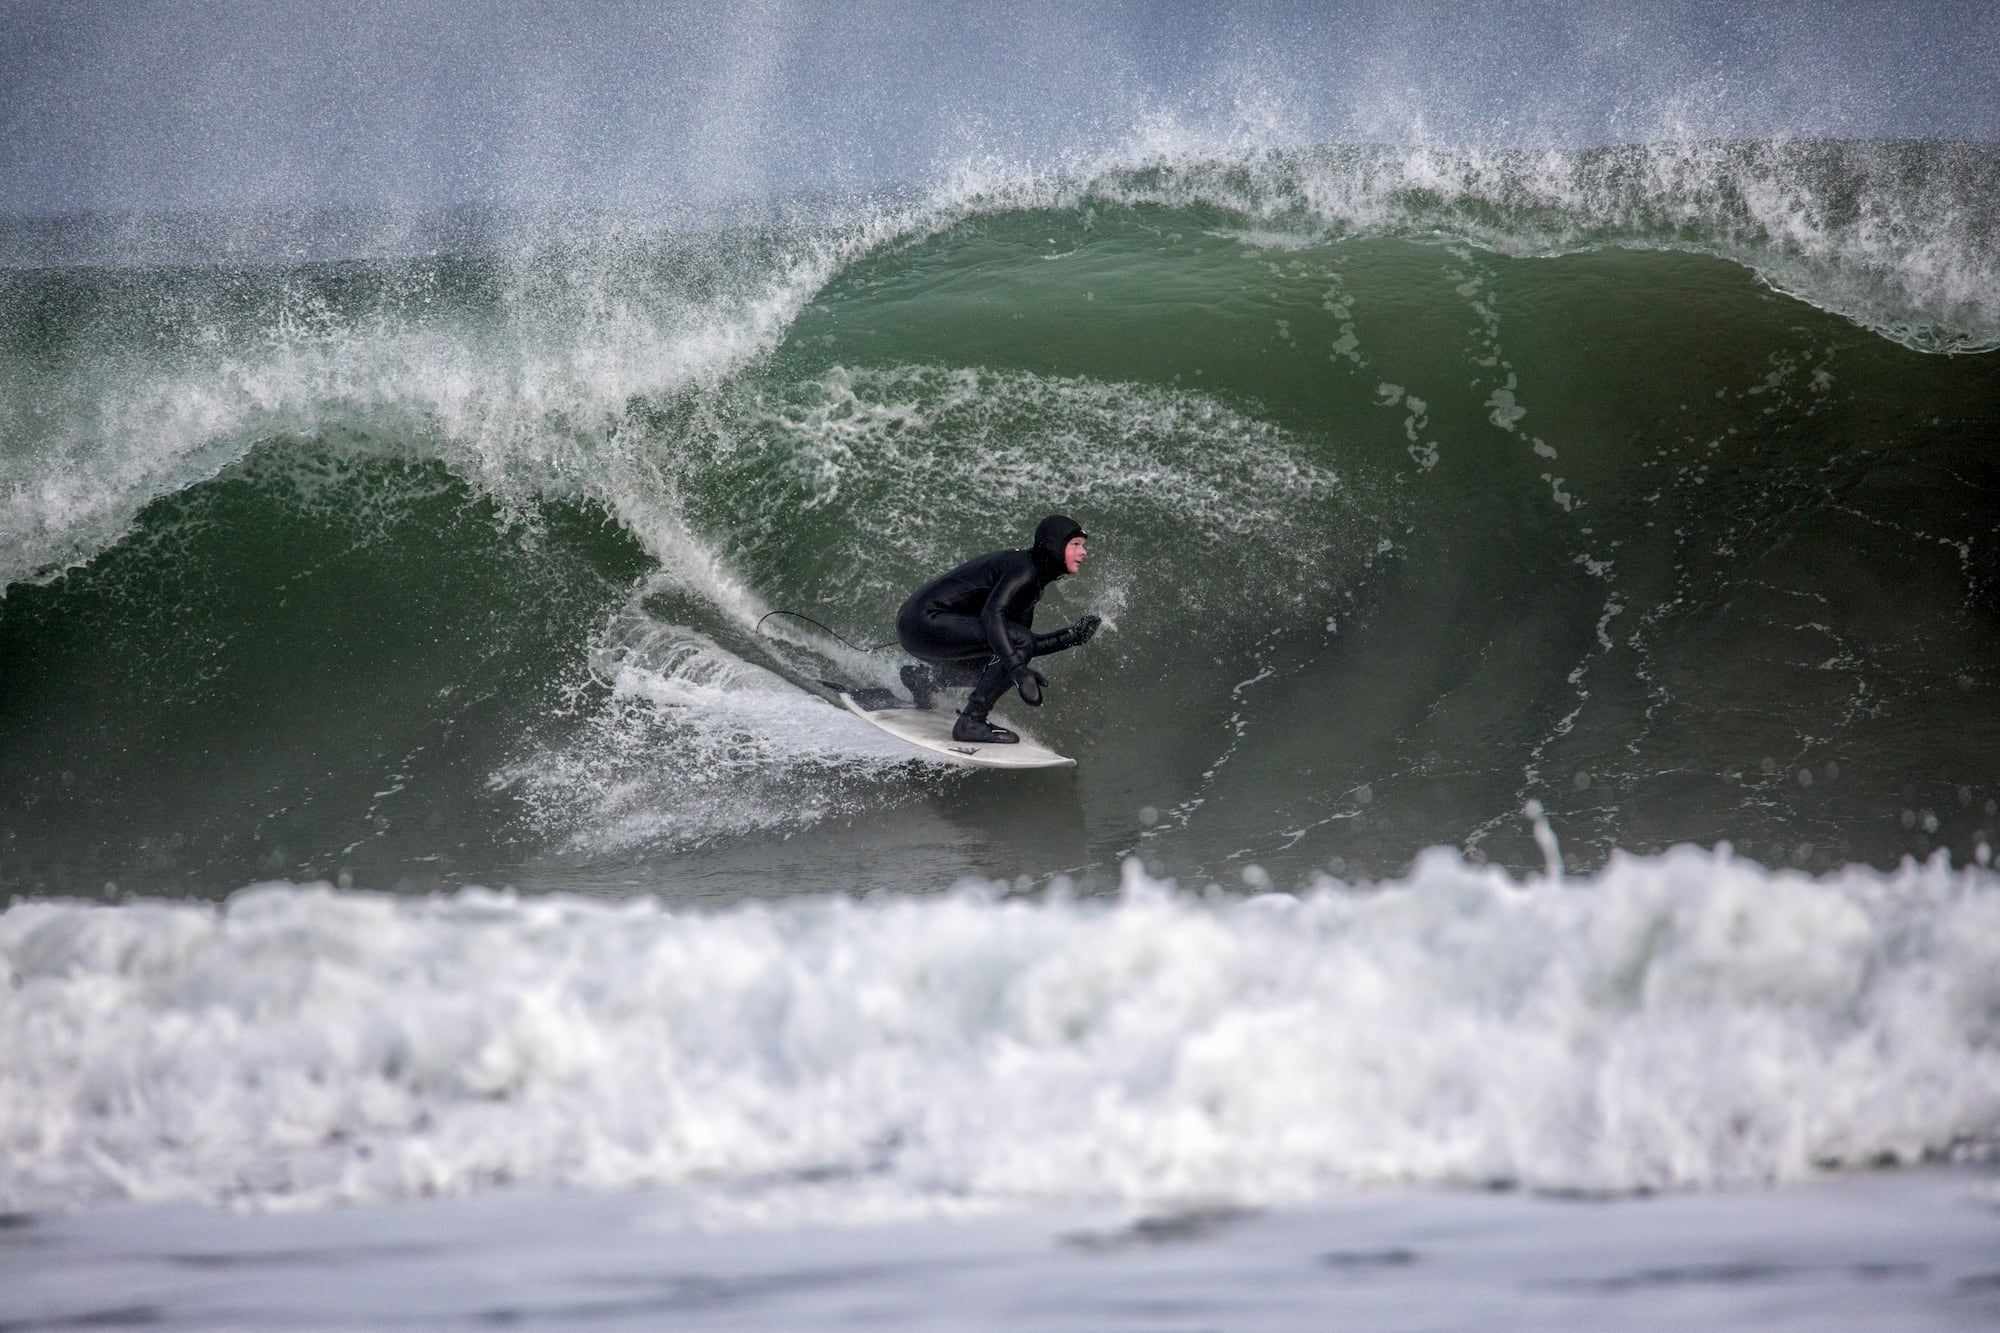 Man crouching on surfboard as he drops into large barreling wave.